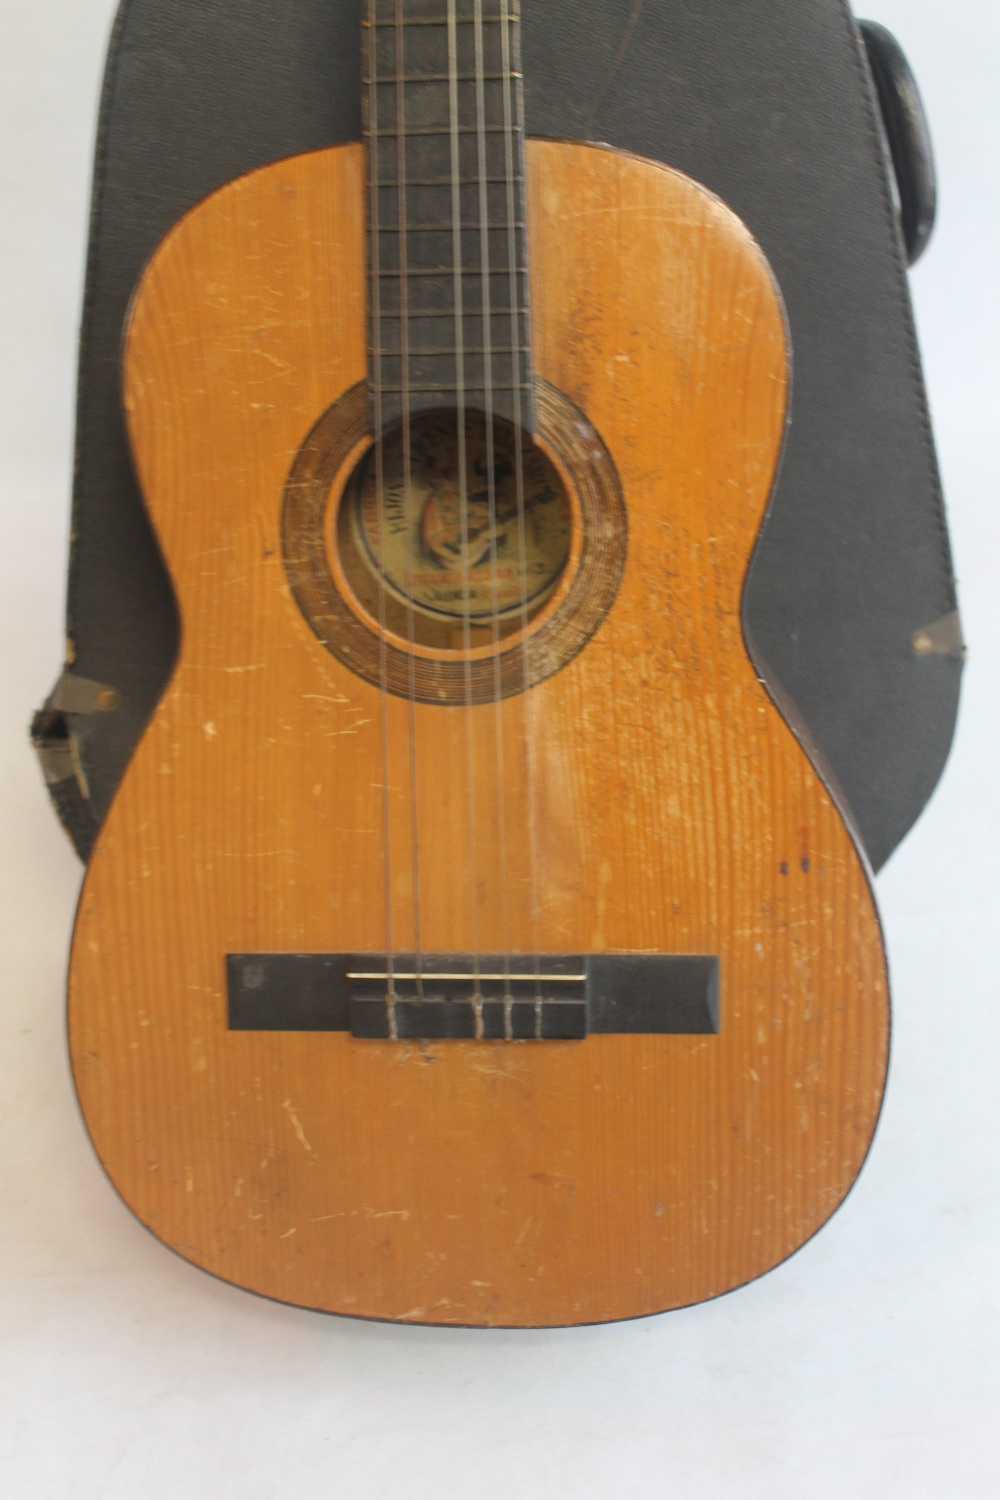 A VINTAGE SPANISH VINCENTE TATAY GUITAR IN CARRY CASE - Image 3 of 5